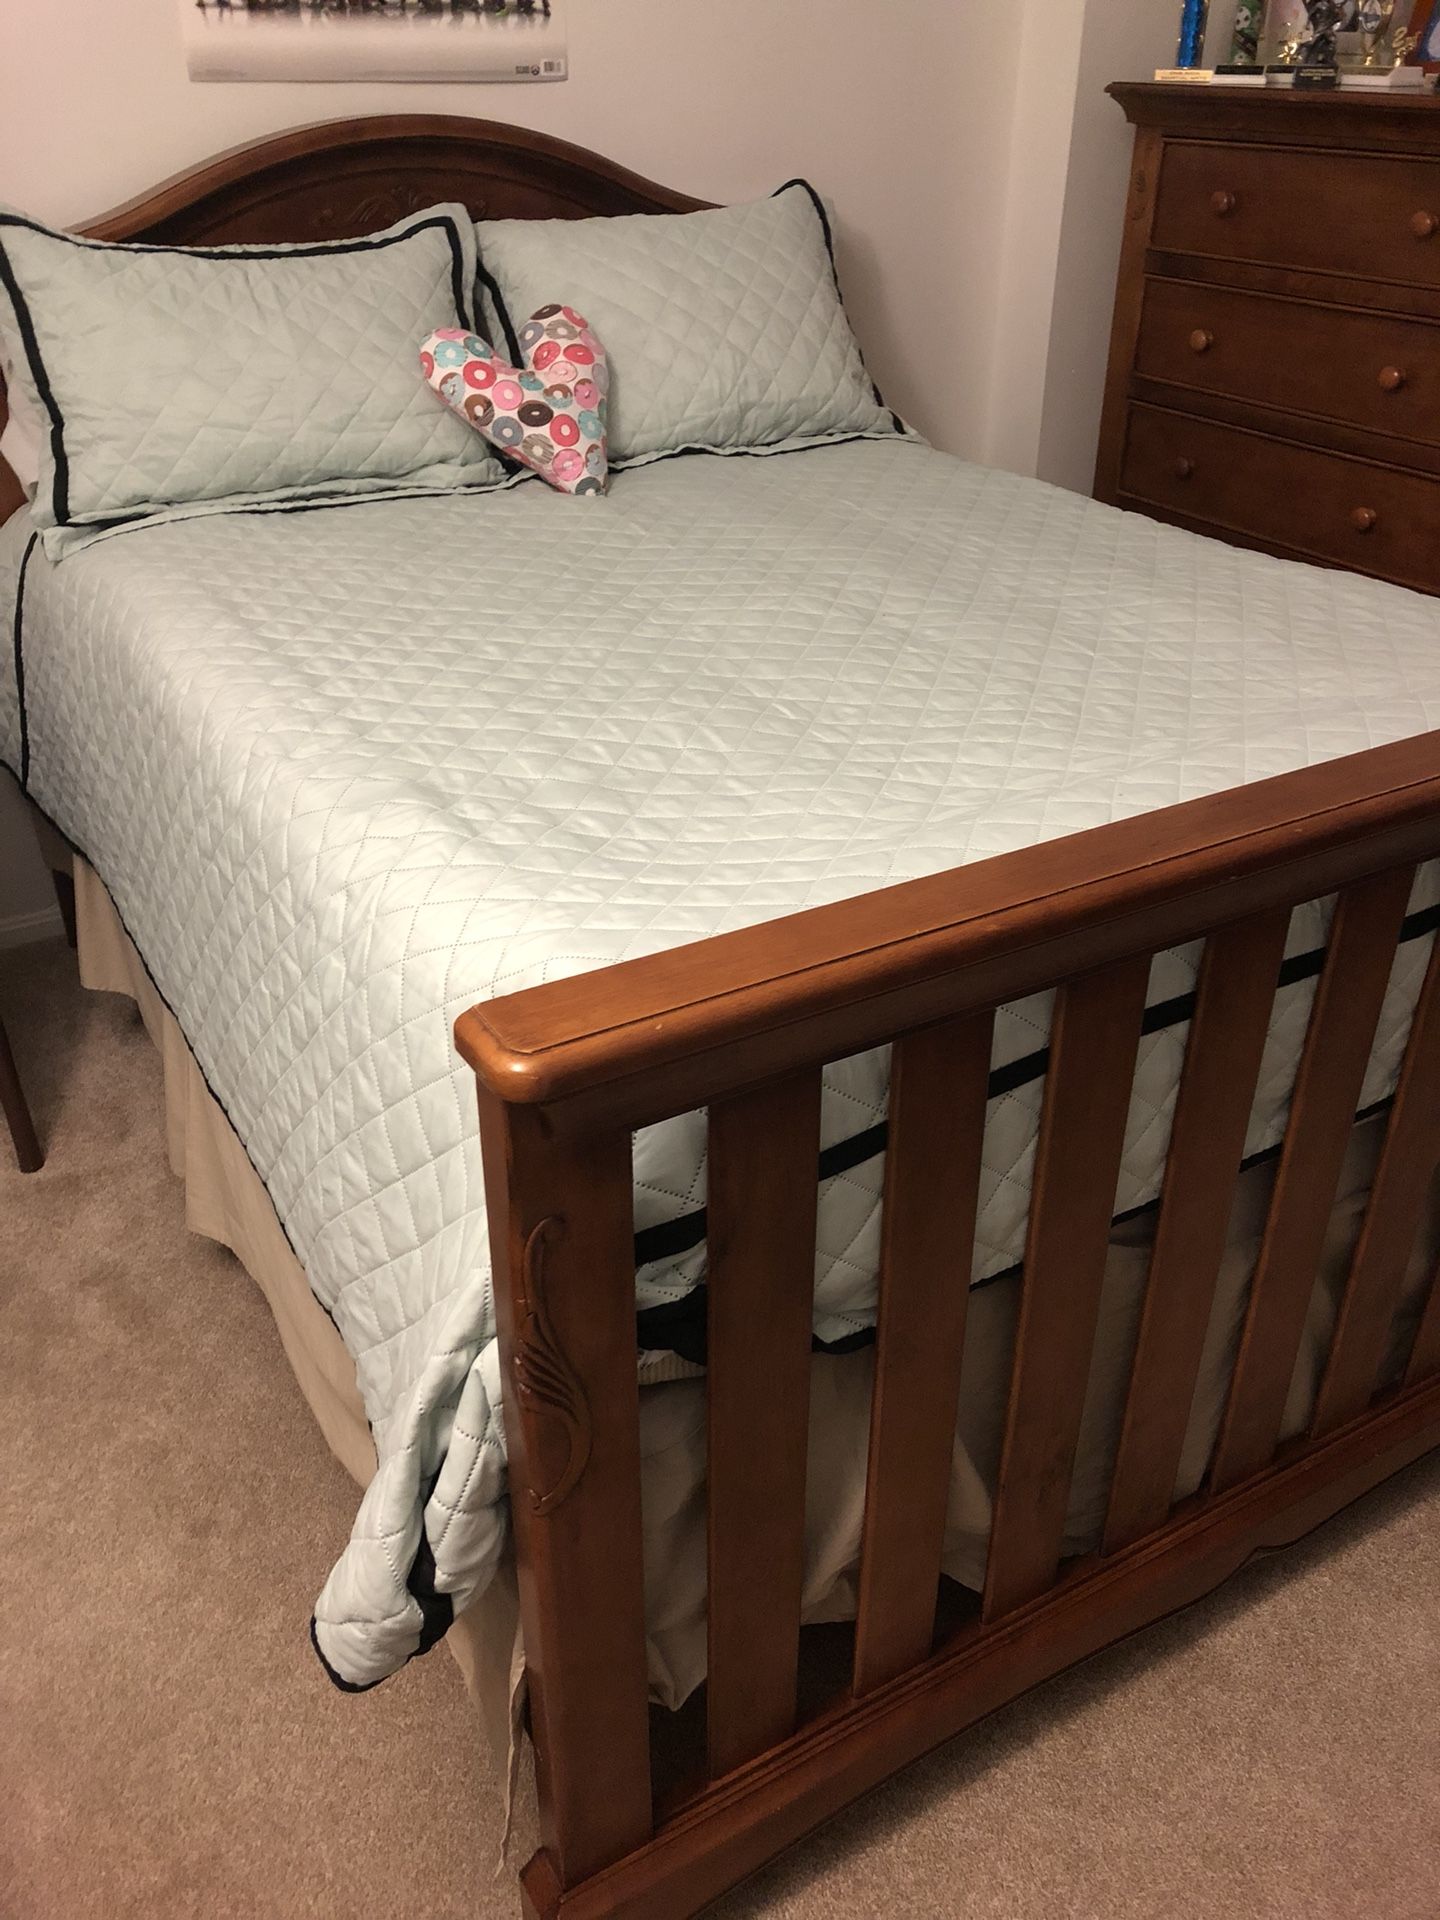 Bedroom set - convertible crib made into a full size bed.